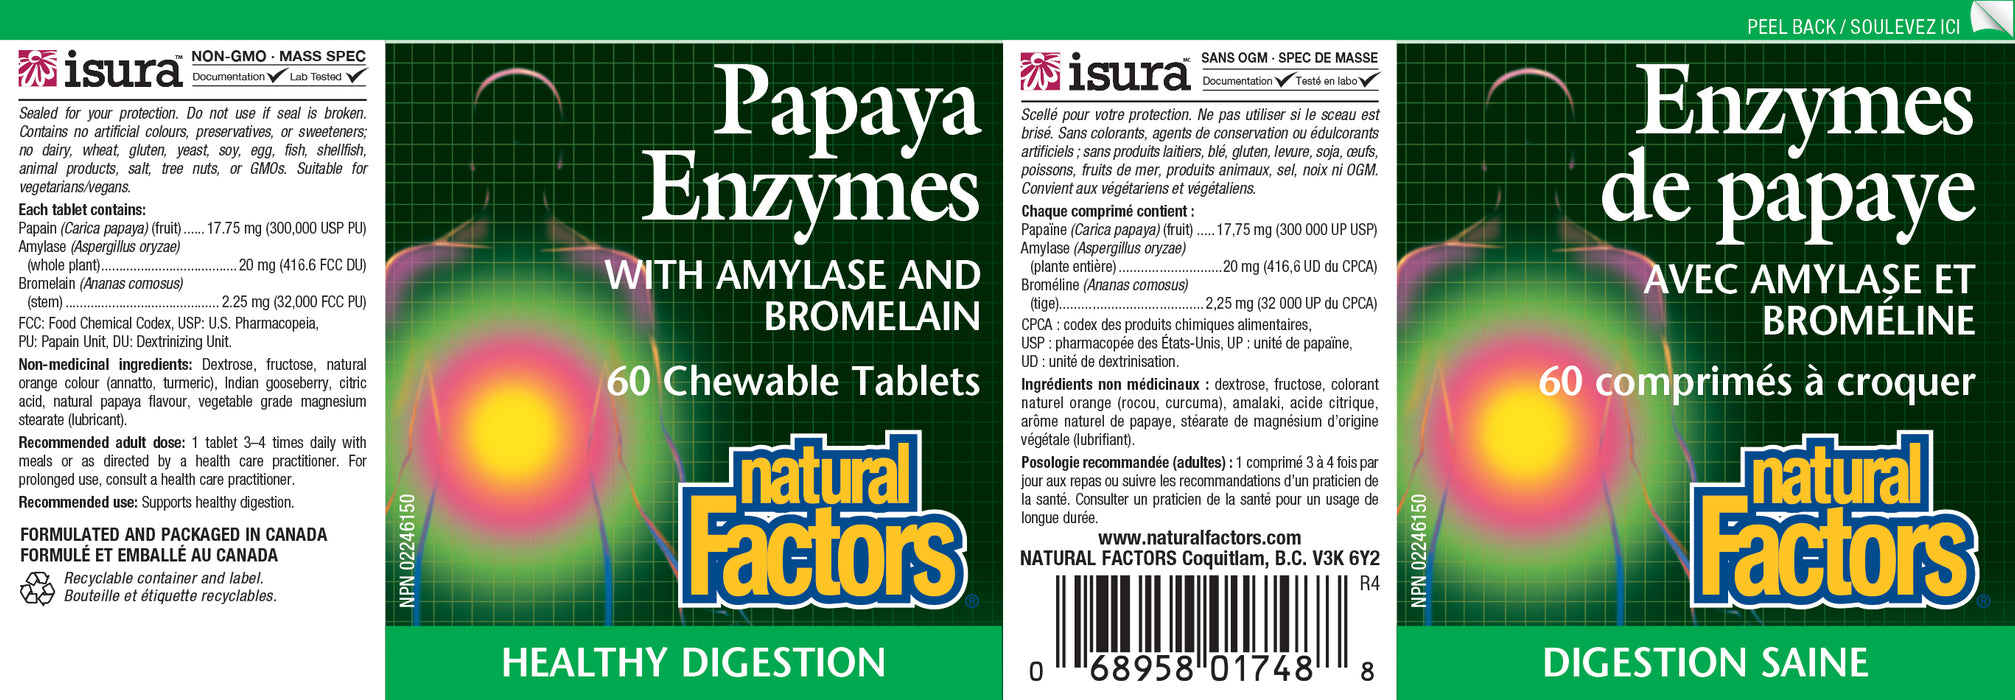 Natural Factors Papaya Enzyme with Amylase and Bromelaine 60 Chewable Tablets